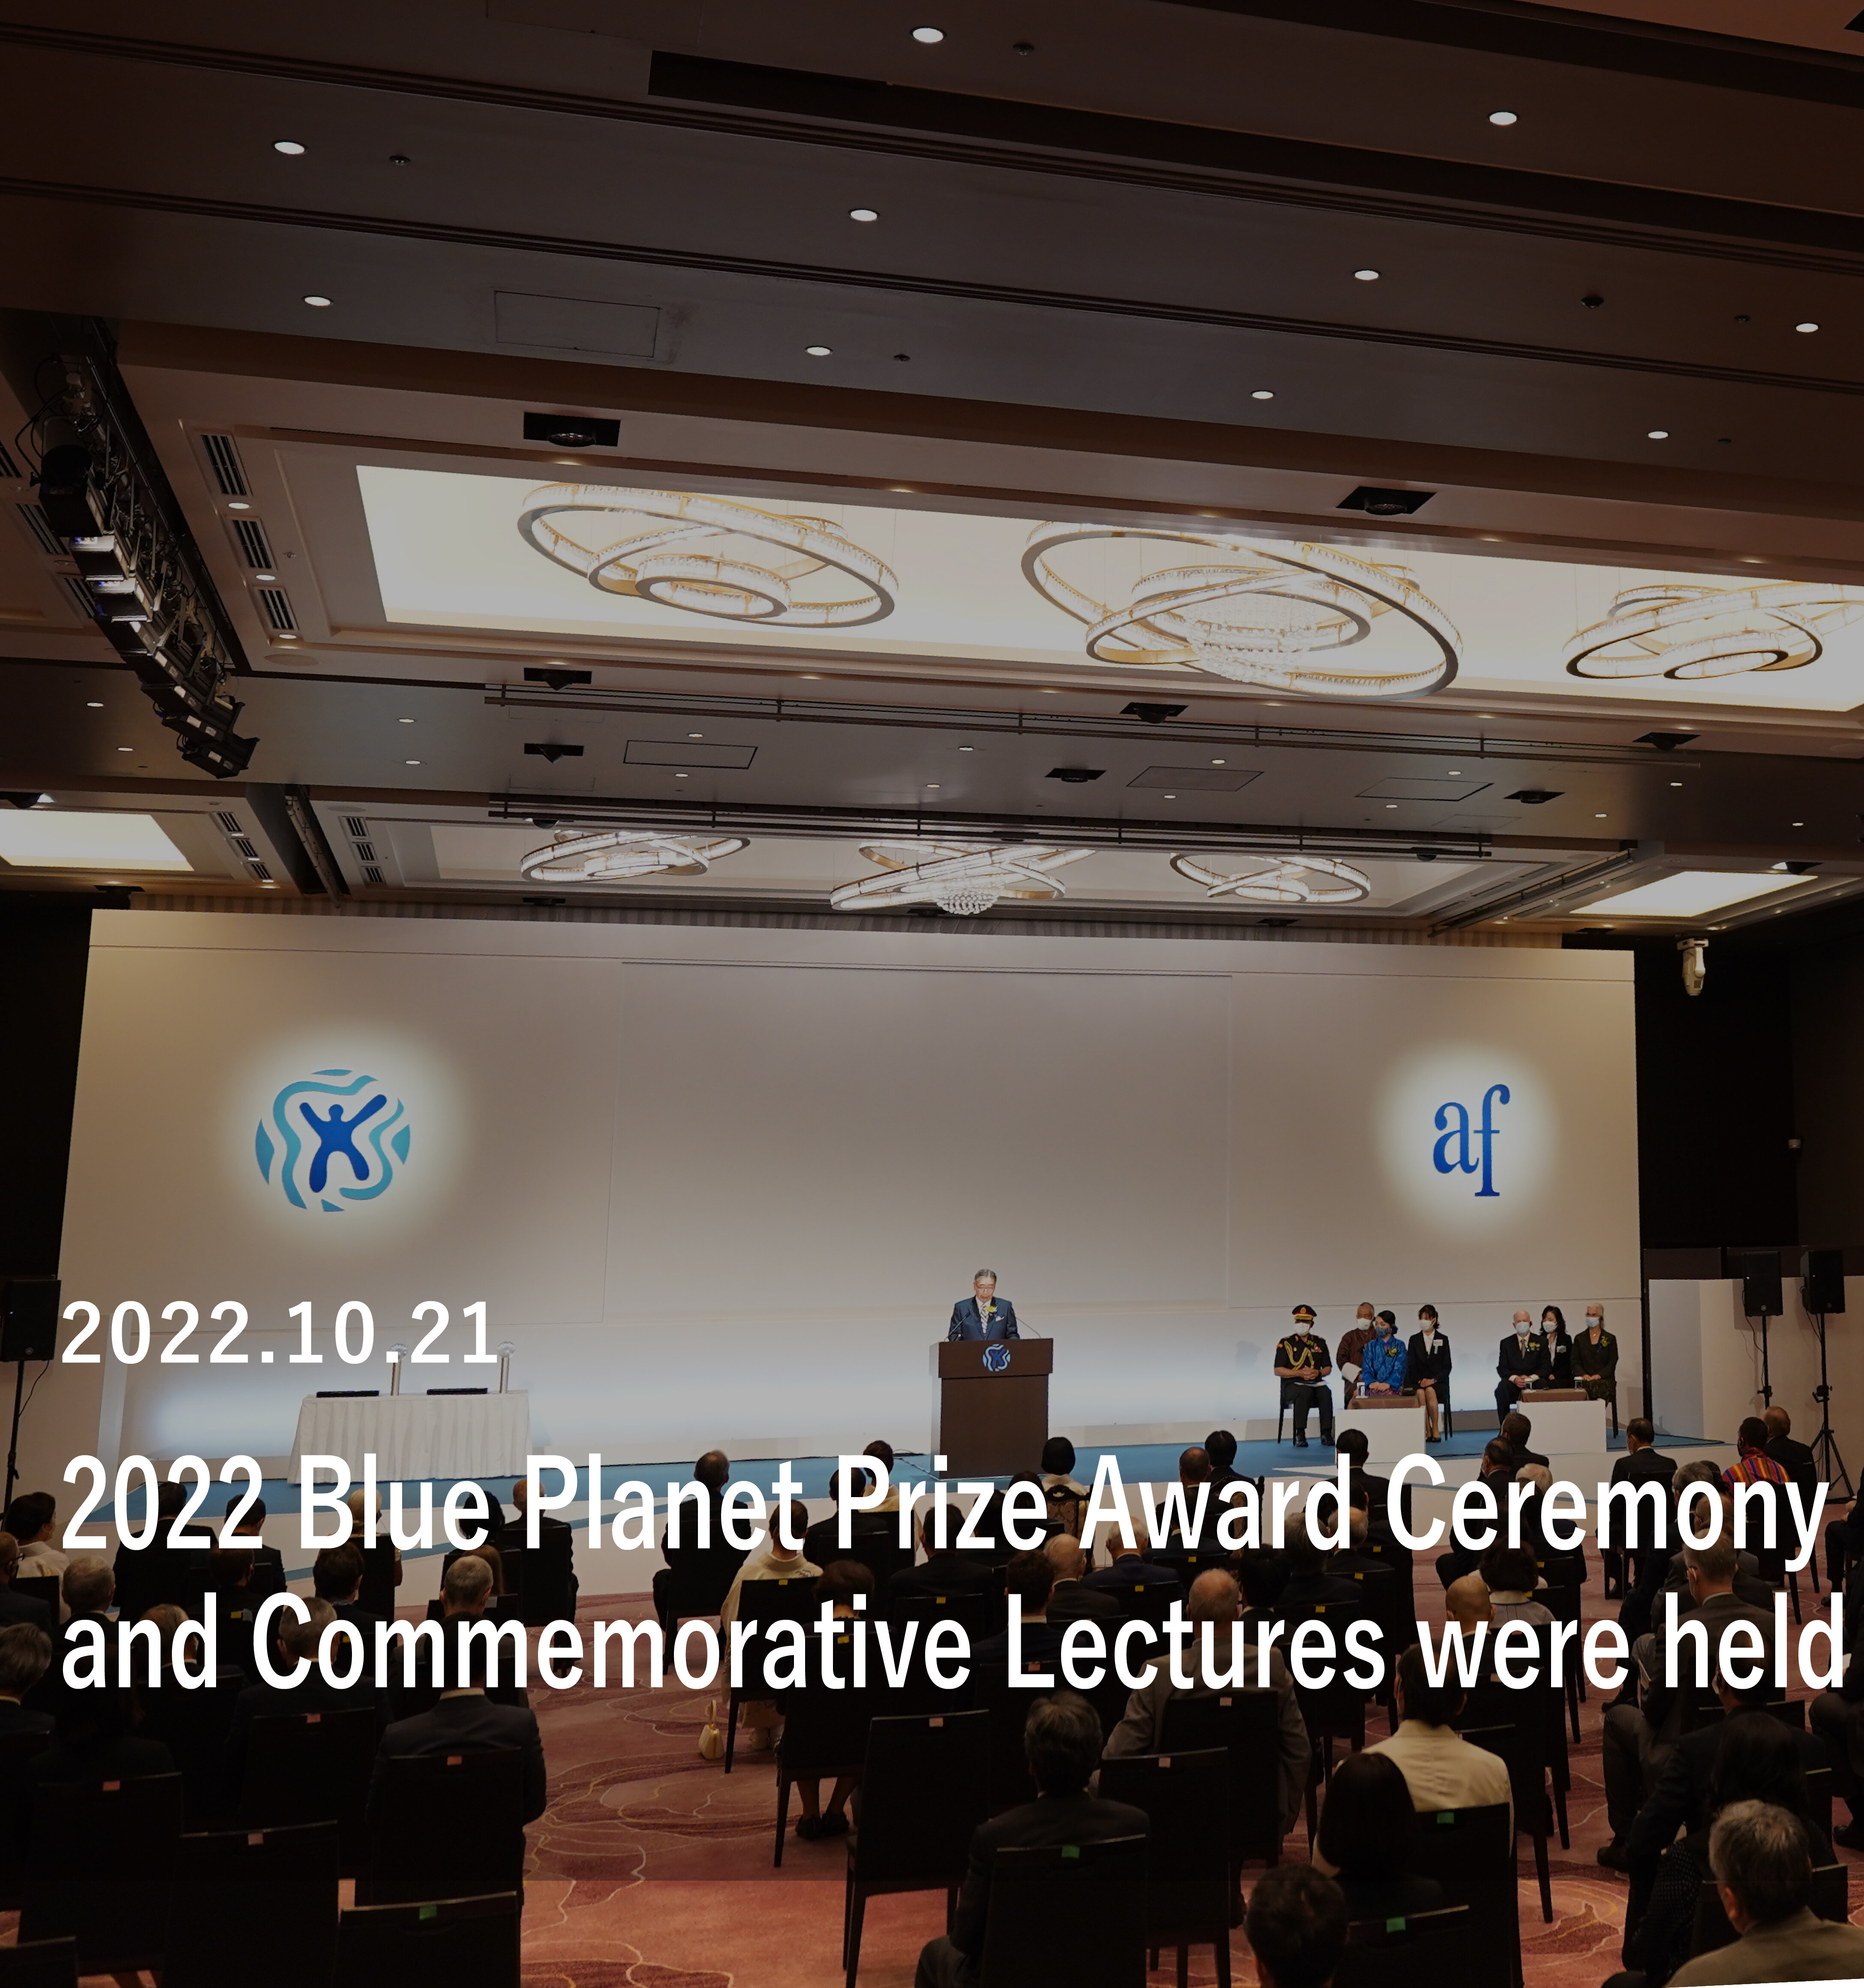 2022 Blue Planet Prize Award Ceremony and Commemorative Lectures were held